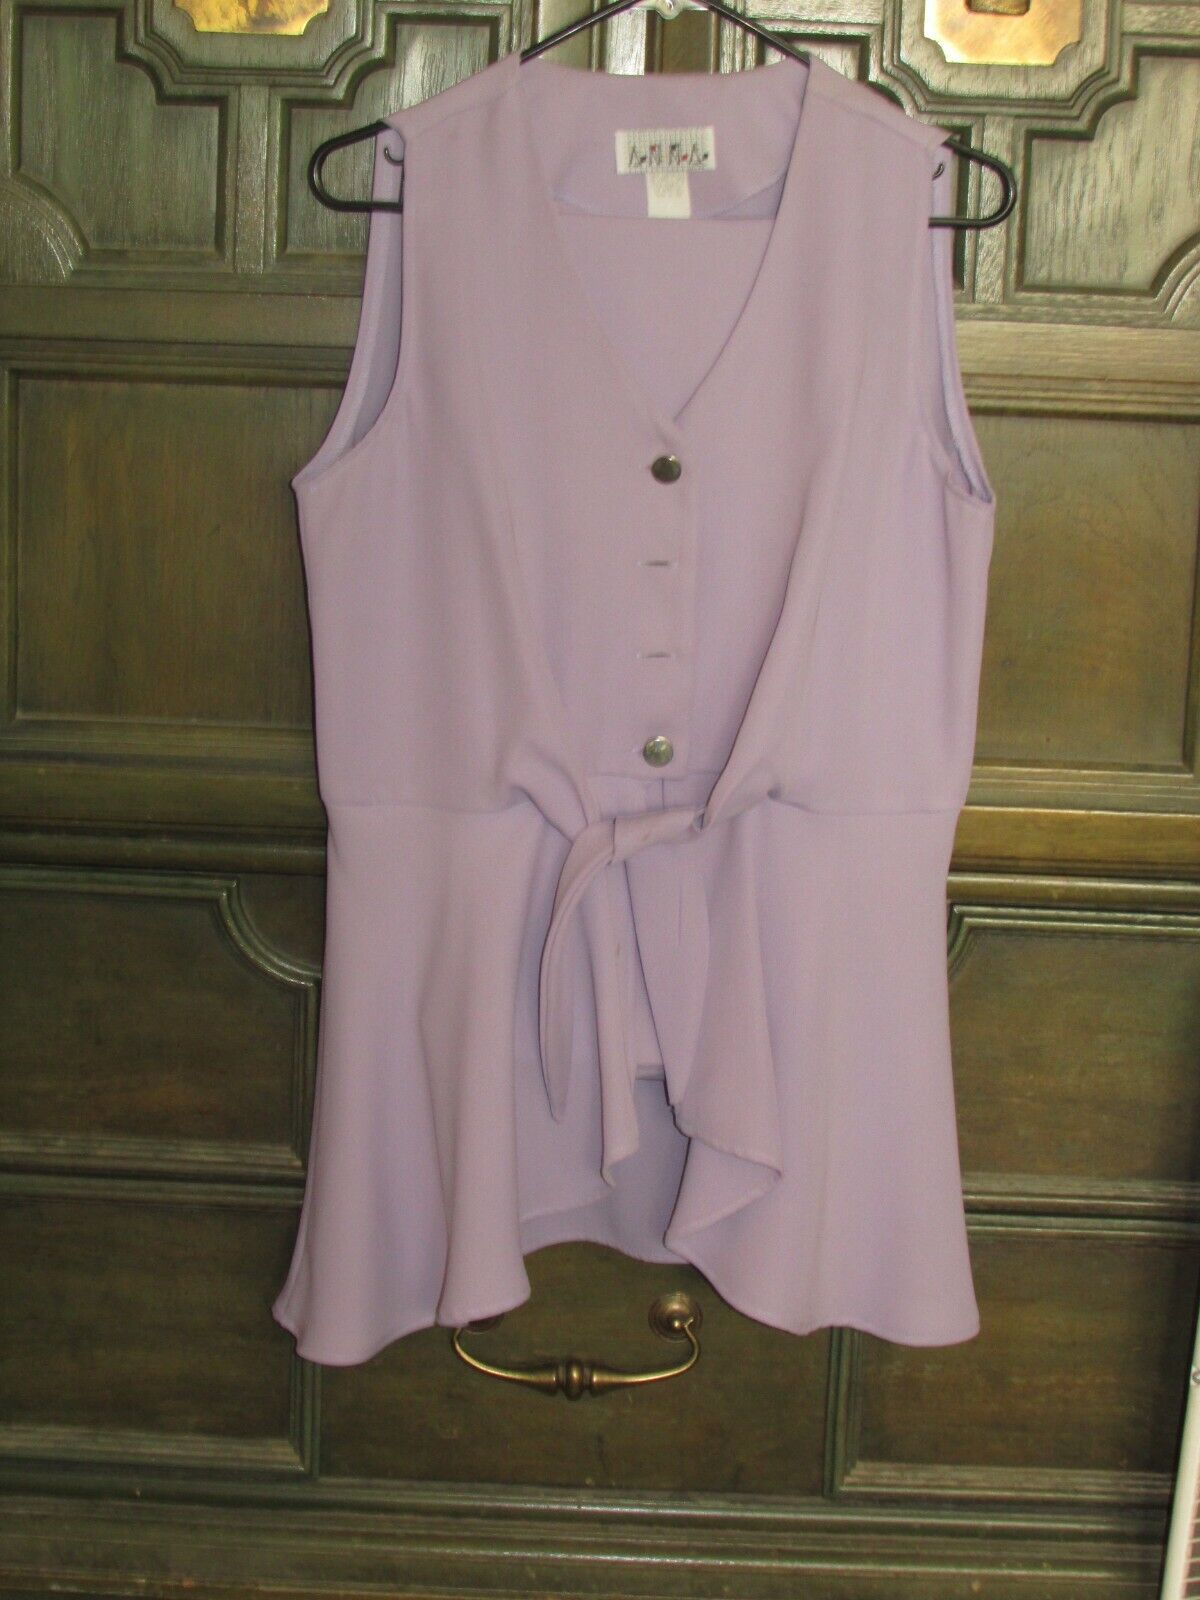 Primary image for PANTS OUTFIT lavender straight leg, sleeveless top with flair bottom (34)  